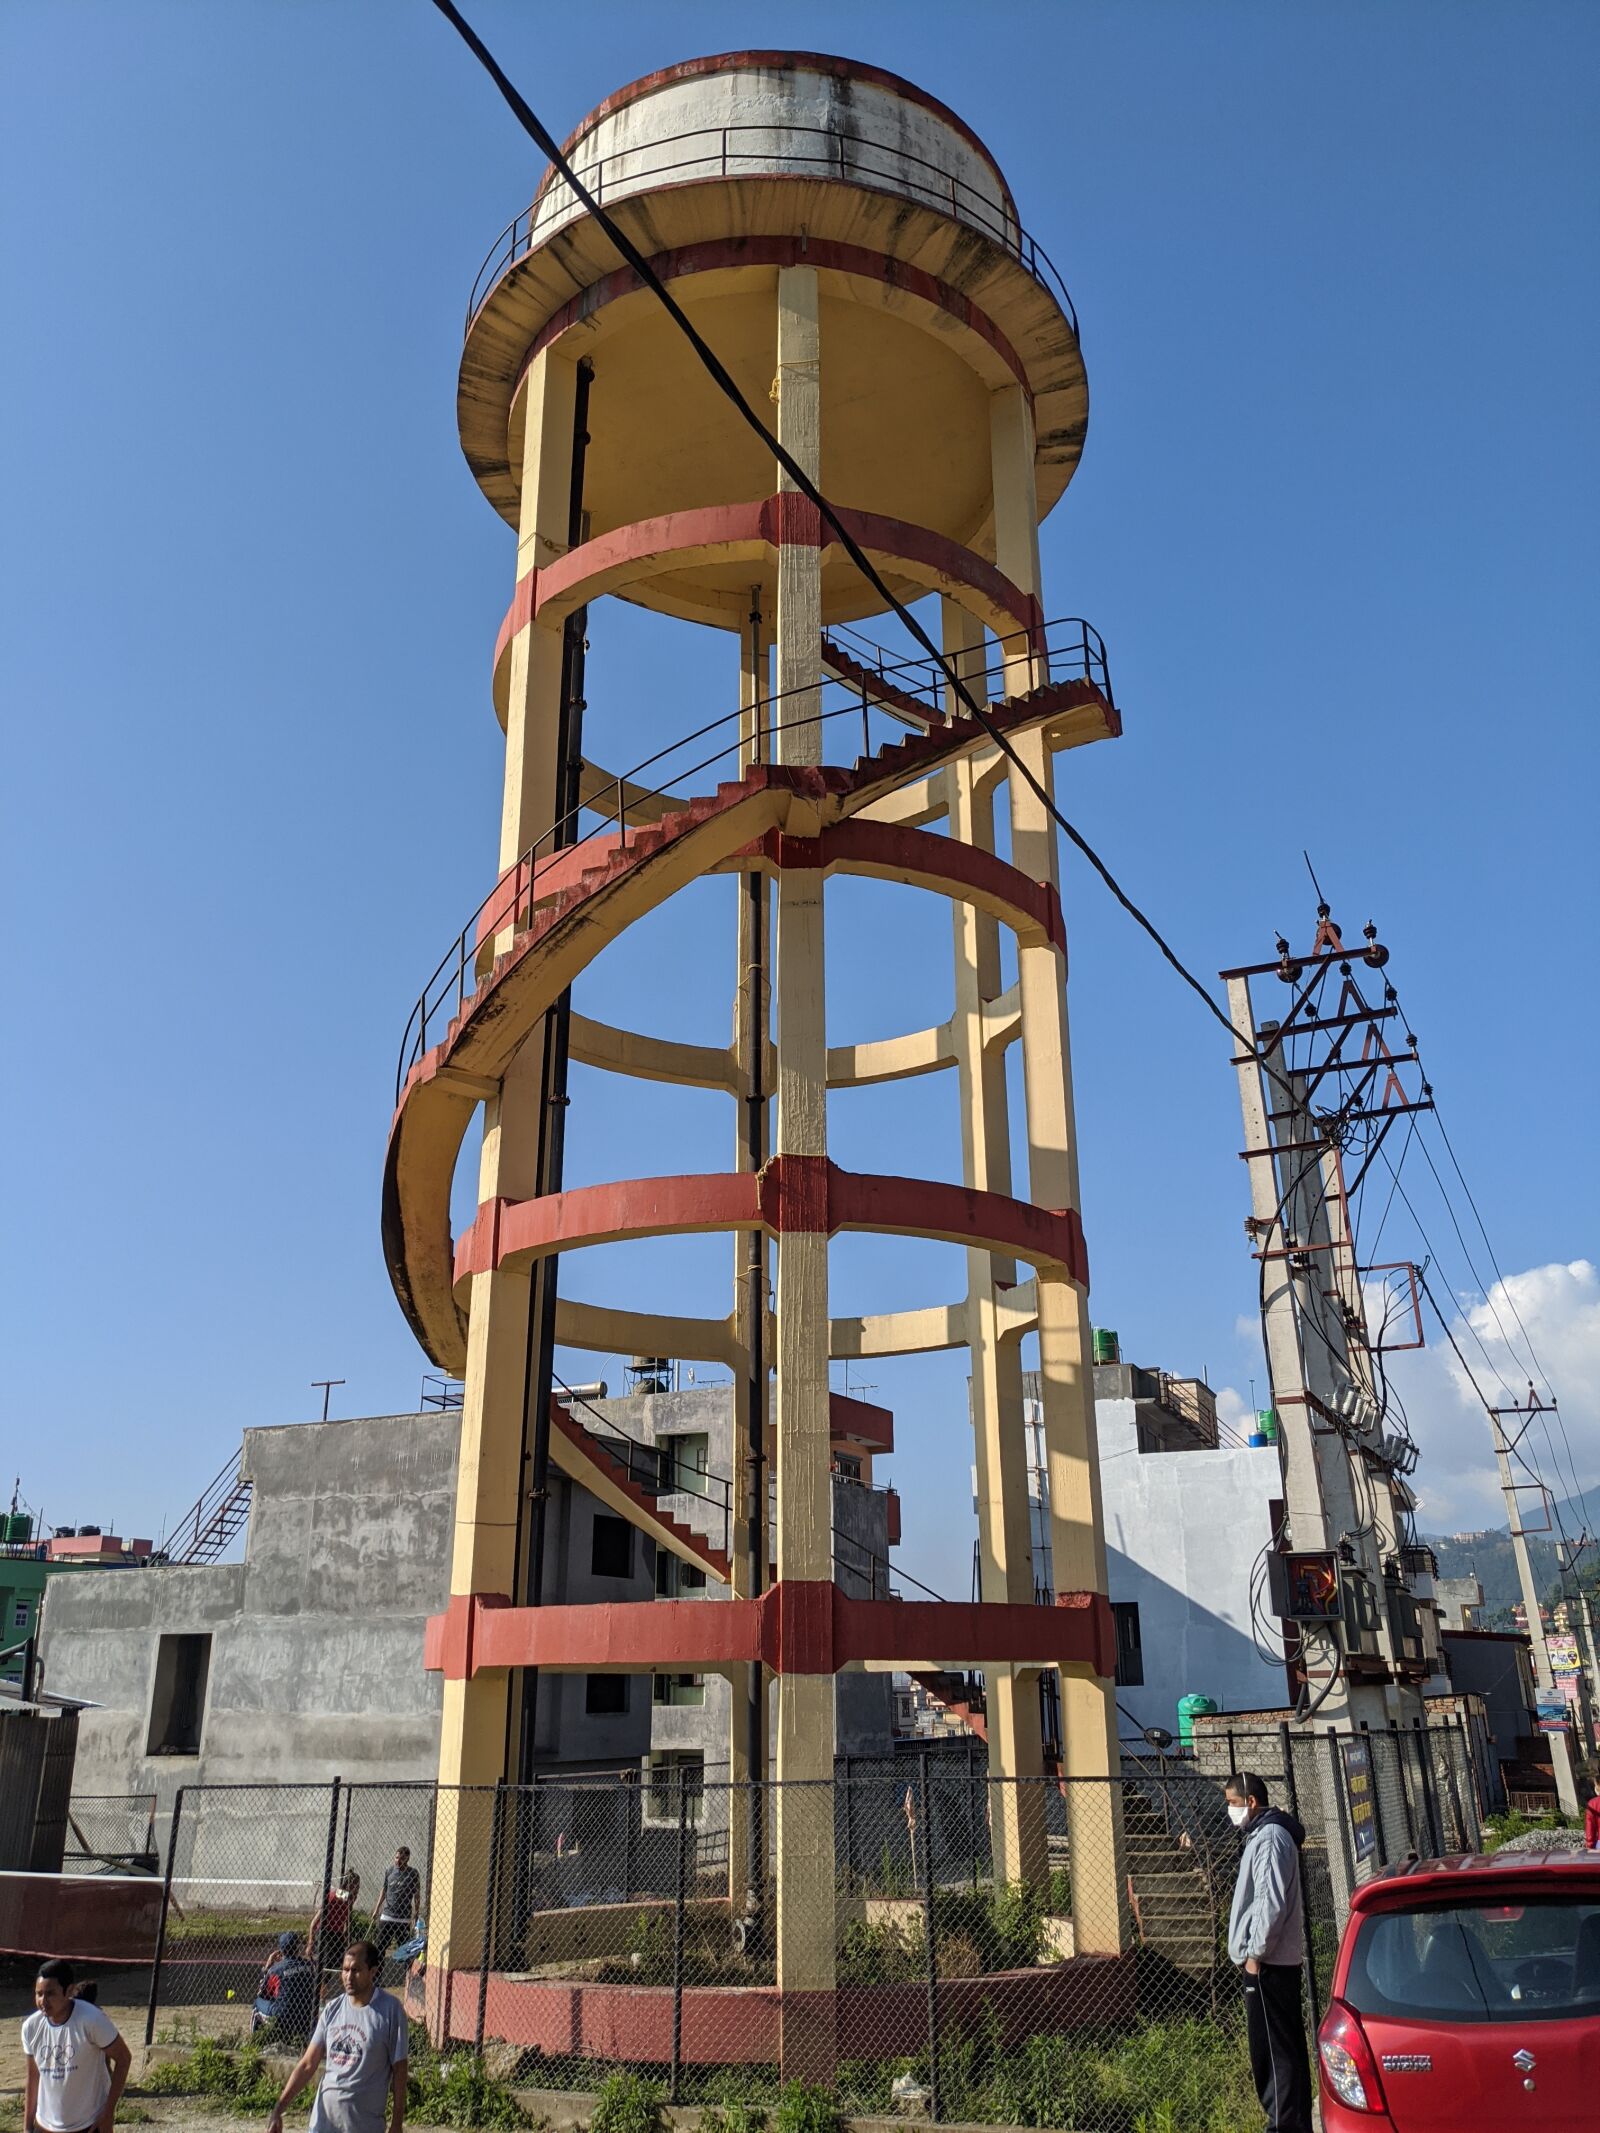 Google Pixel 4 sample photo. Water tower, infrastructure, architecture photography